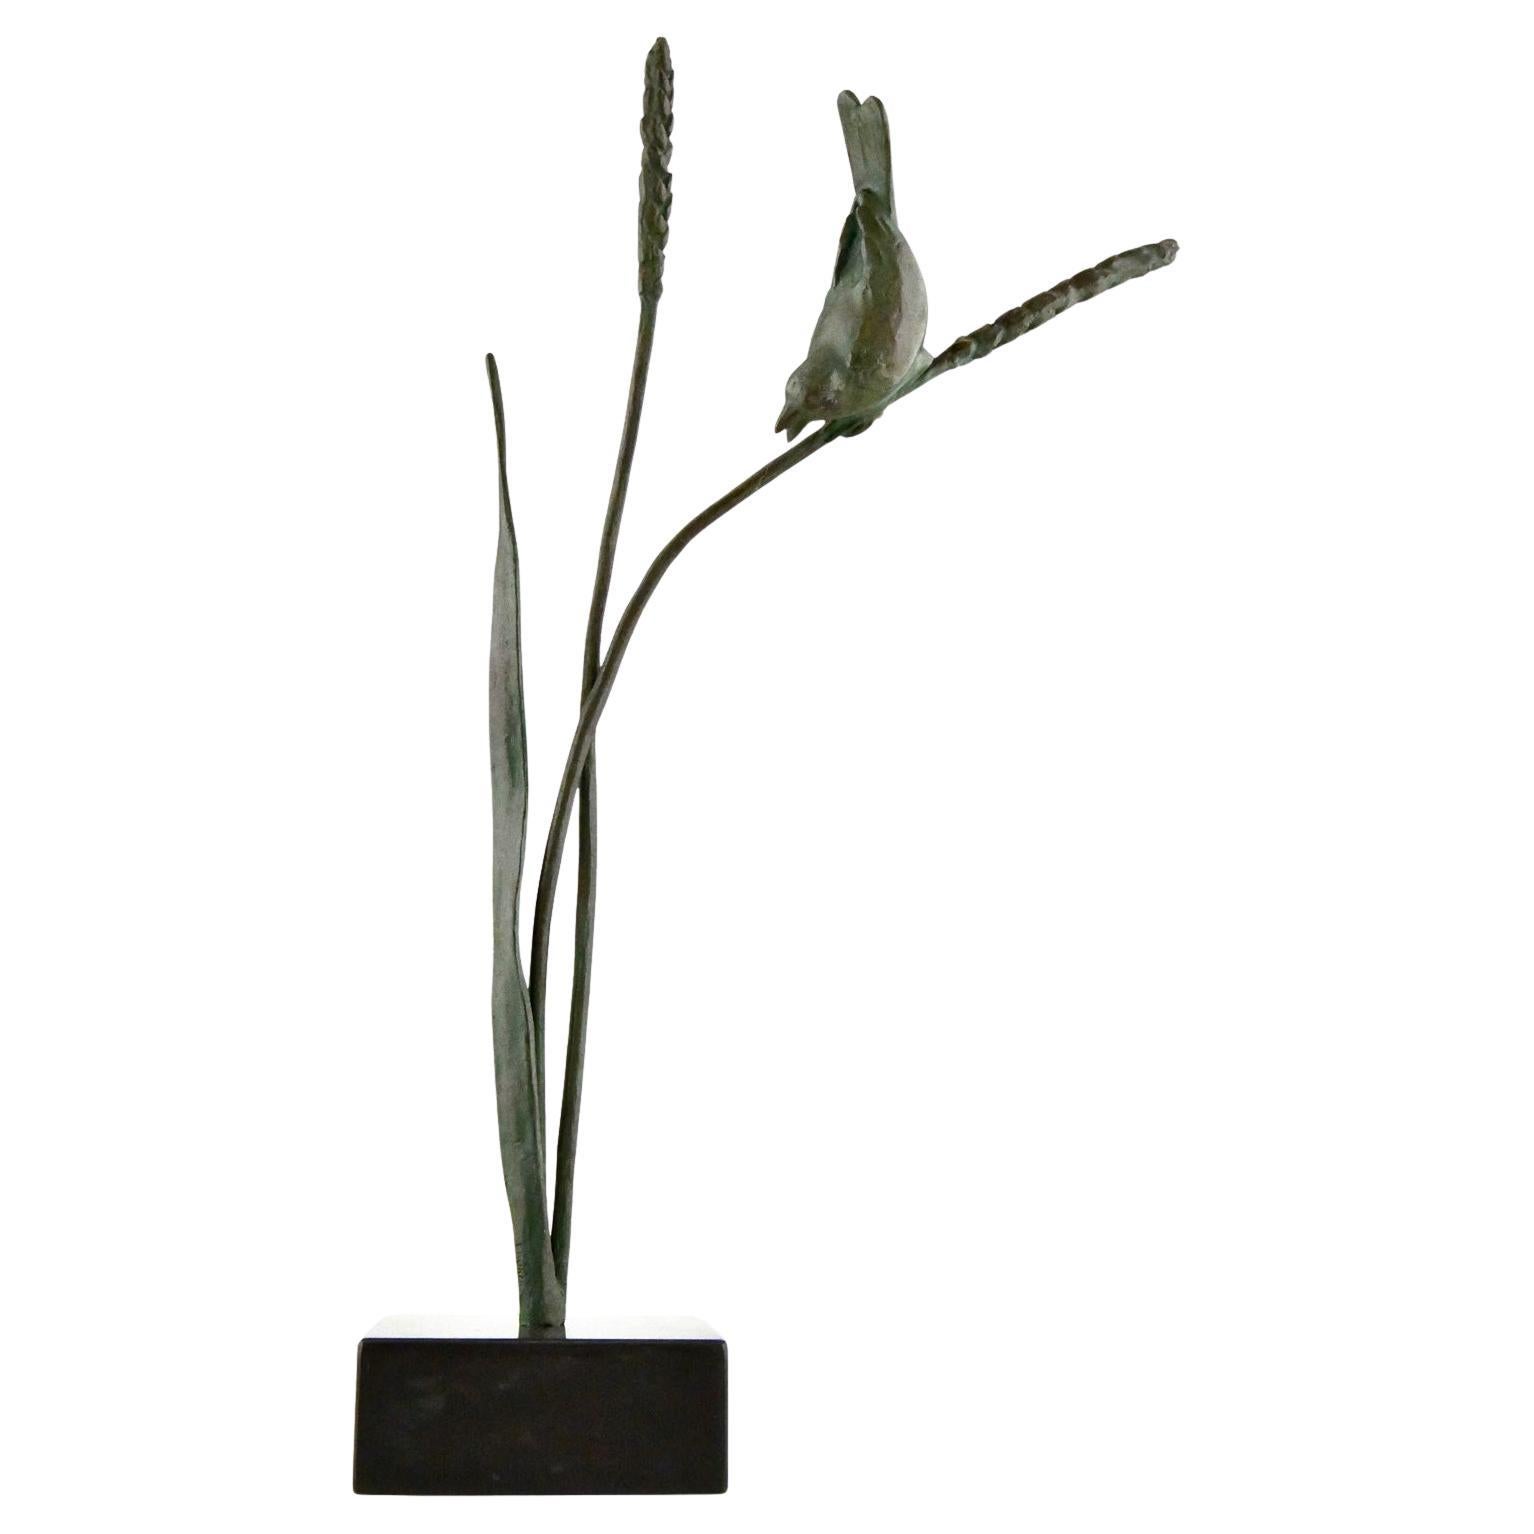 Art Deco bronze sculpture of a bird on a wheat stalk by Chattel, France 1930